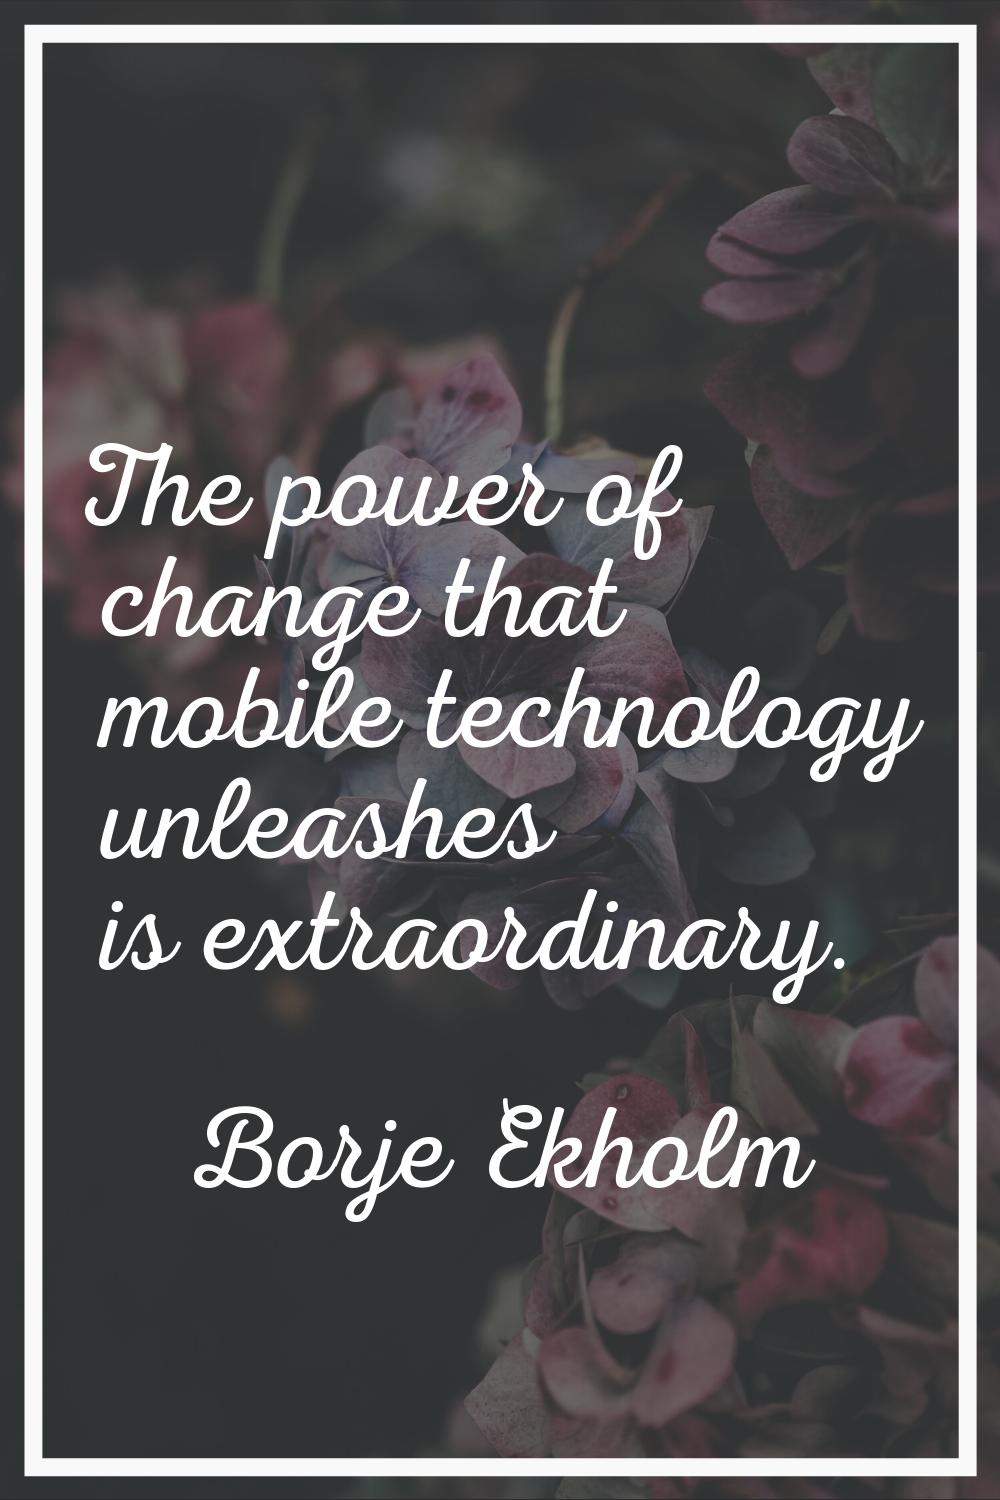 The power of change that mobile technology unleashes is extraordinary.